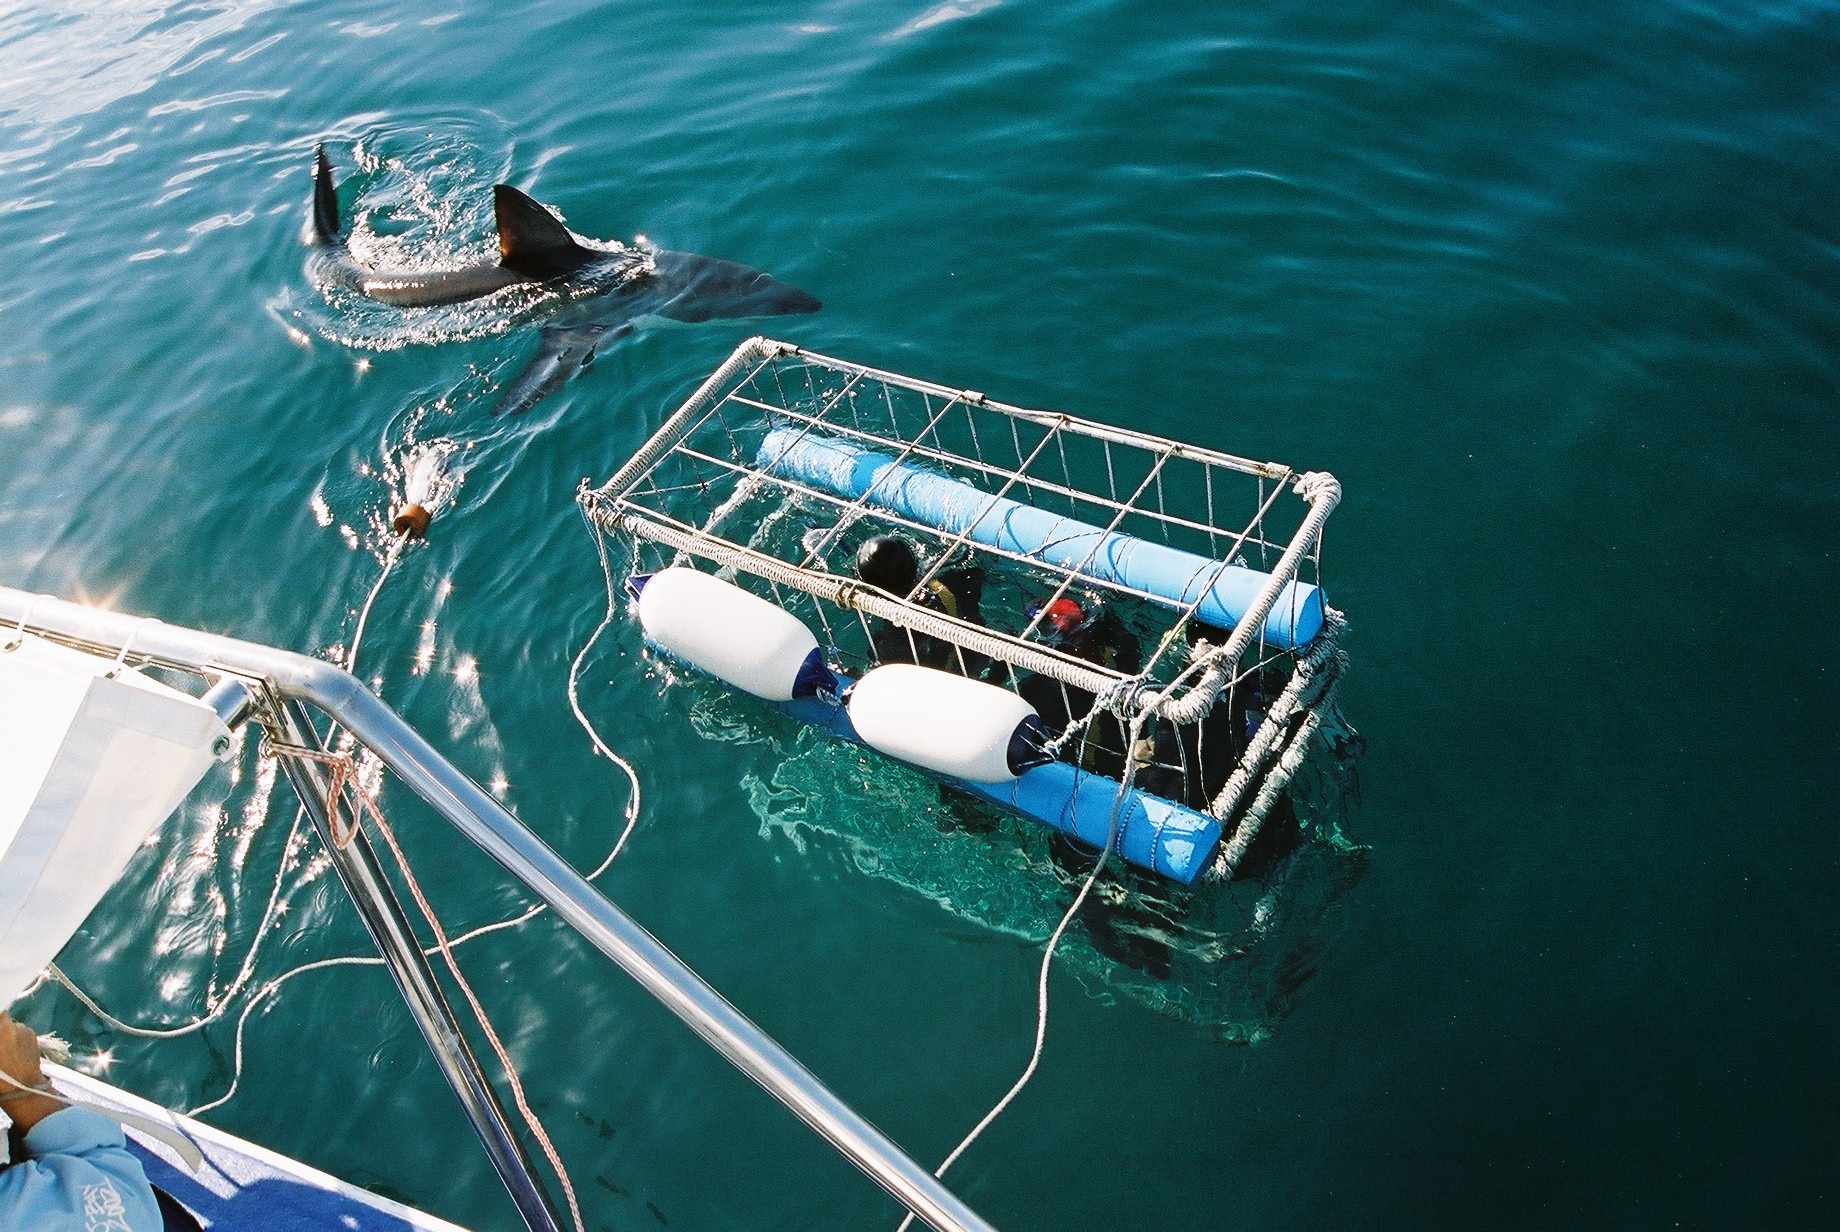 Cage diving with sharks